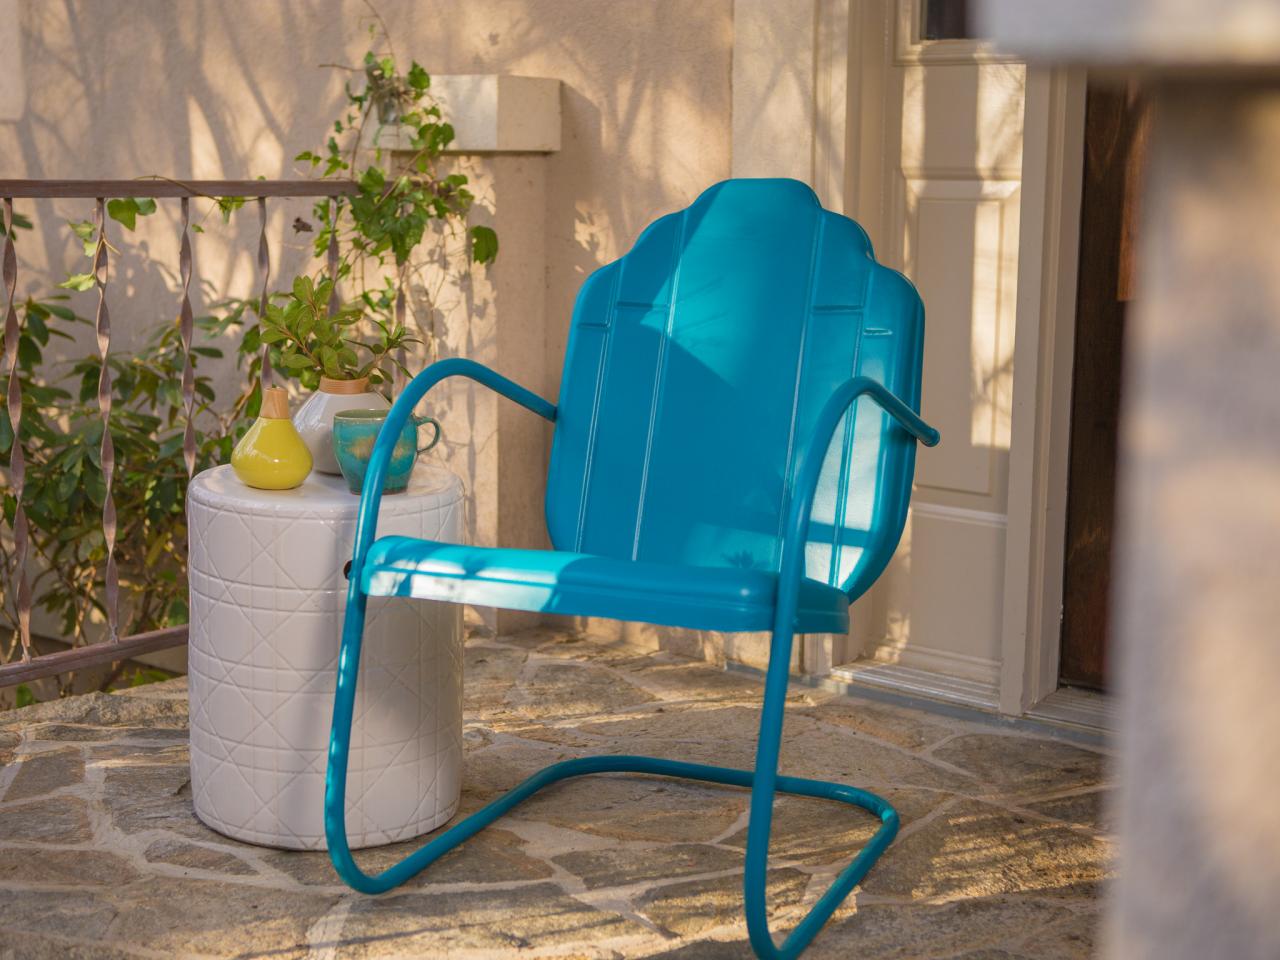 How To Paint An Outdoor Metal Chair - Refinishing Iron Patio Furniture